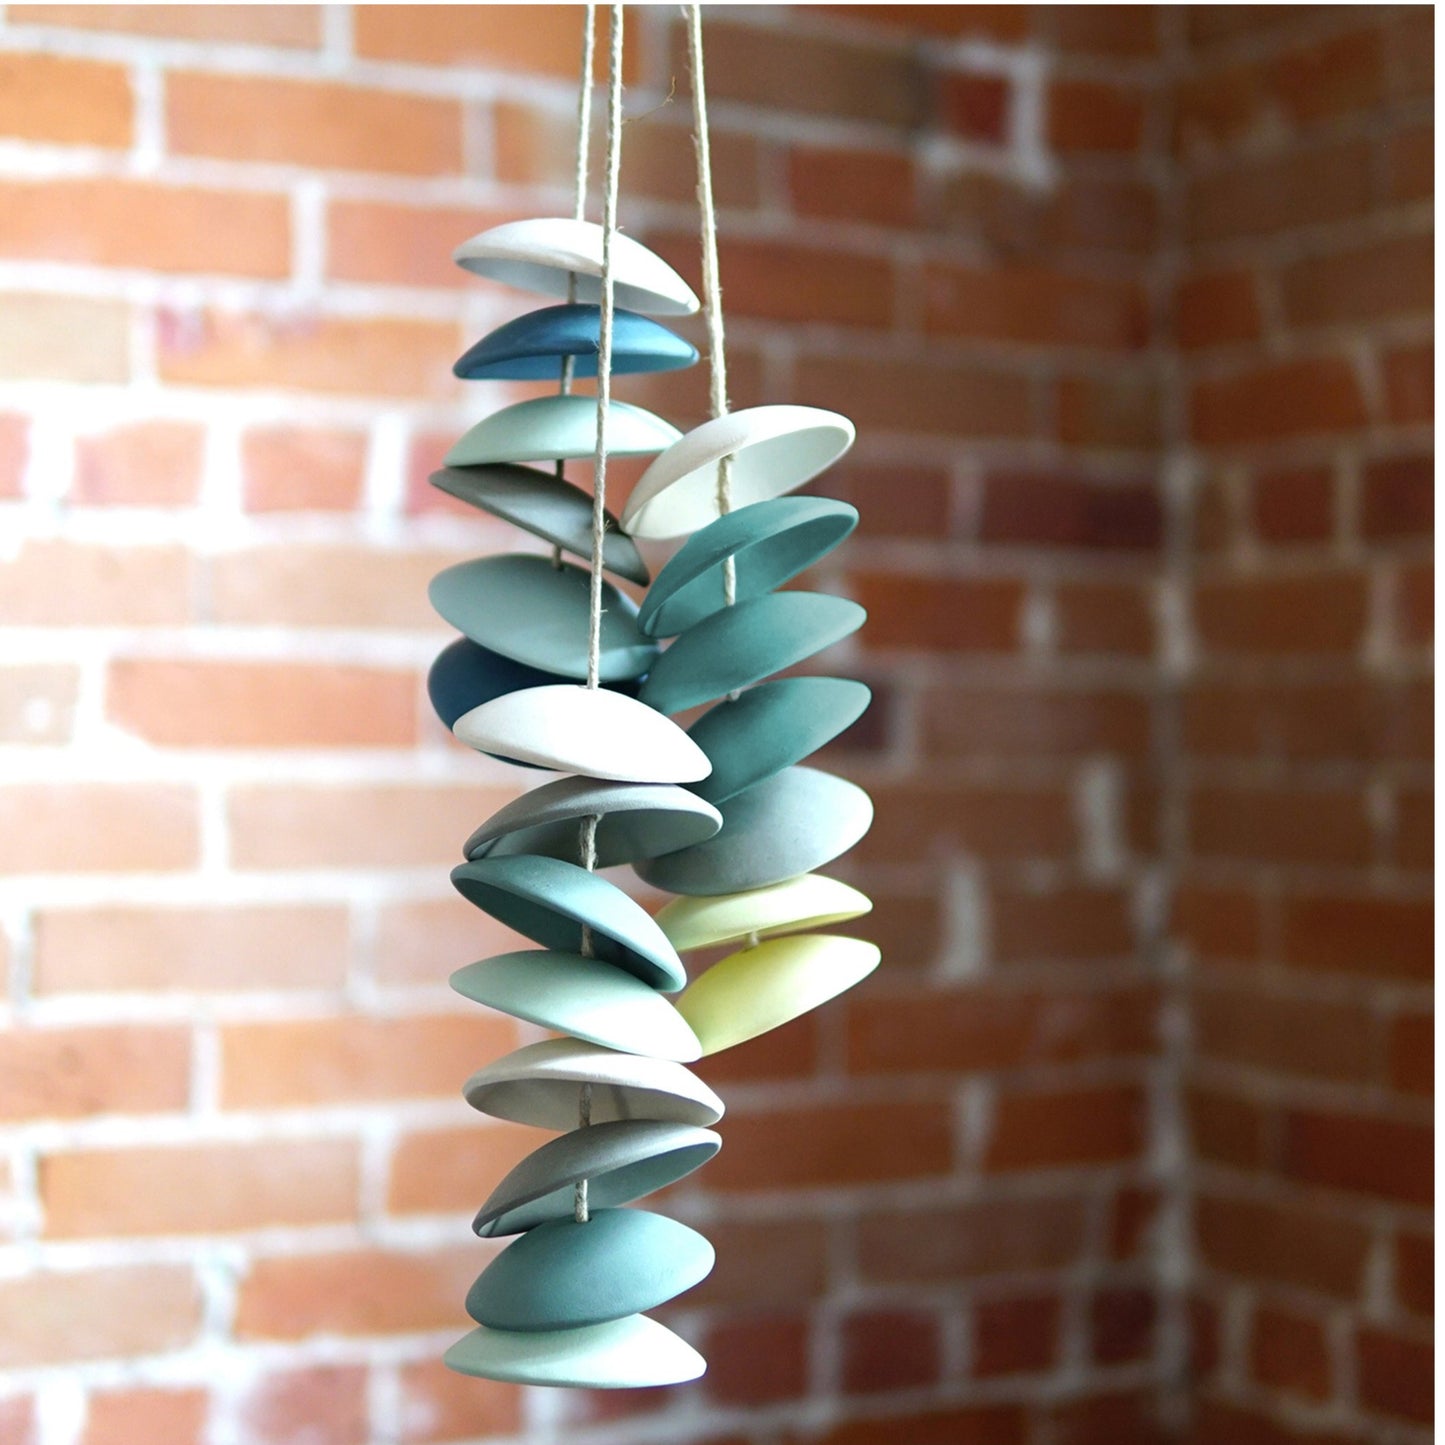 Handcrafted Ceramic Chimes in blues and greens